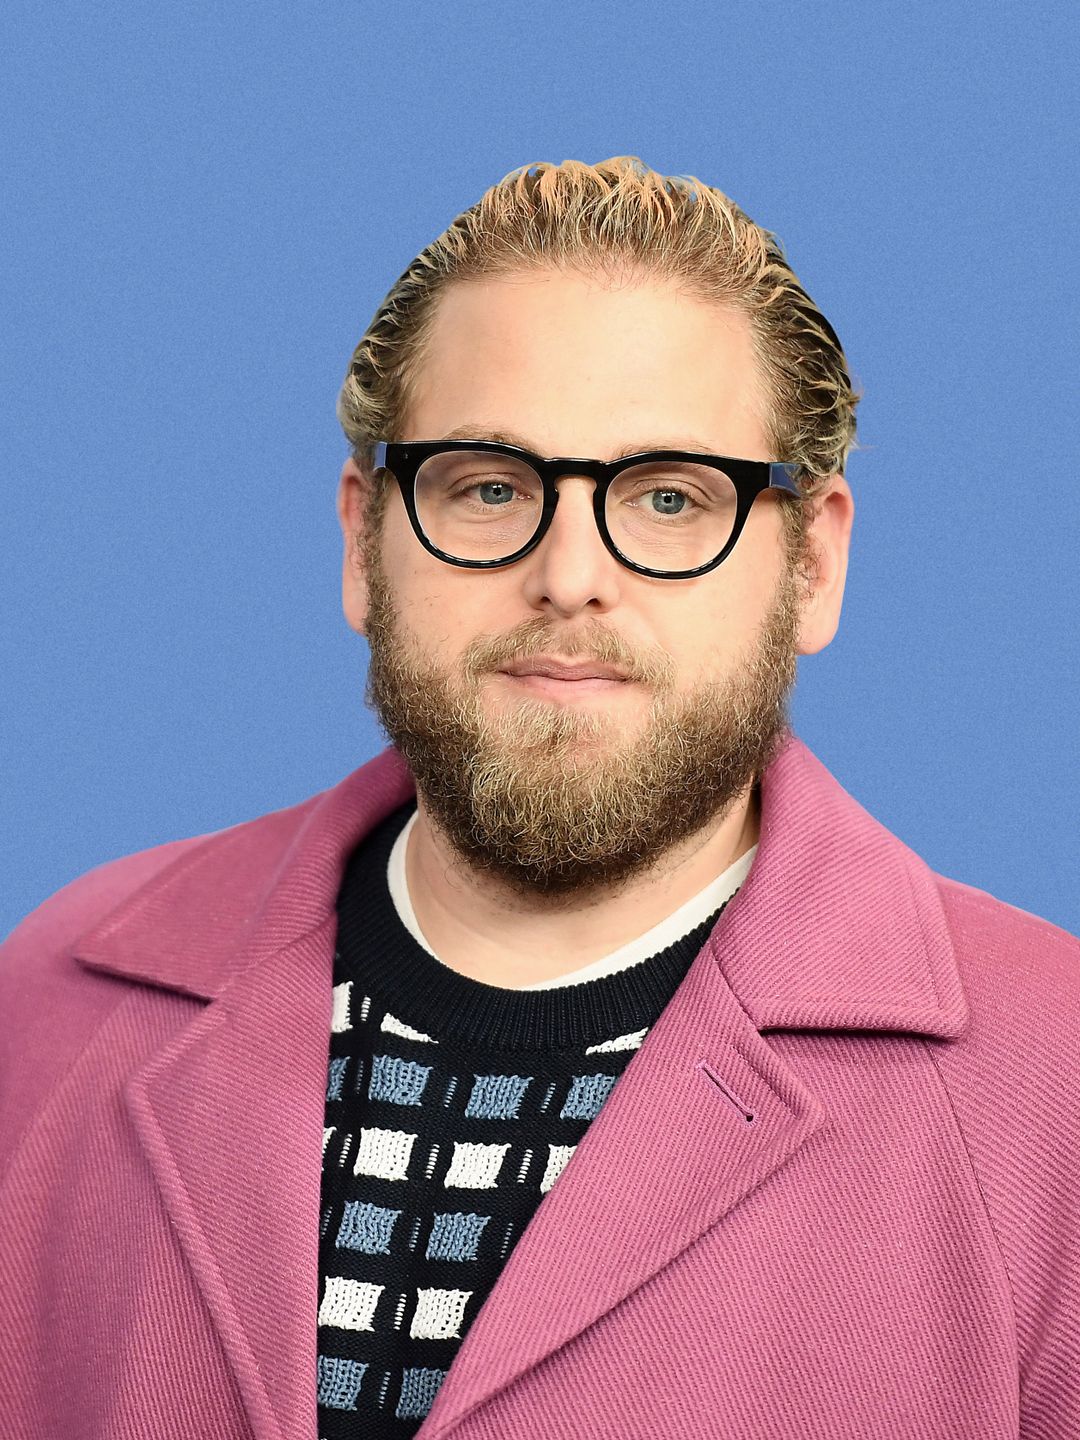 Jonah Hill way to fame